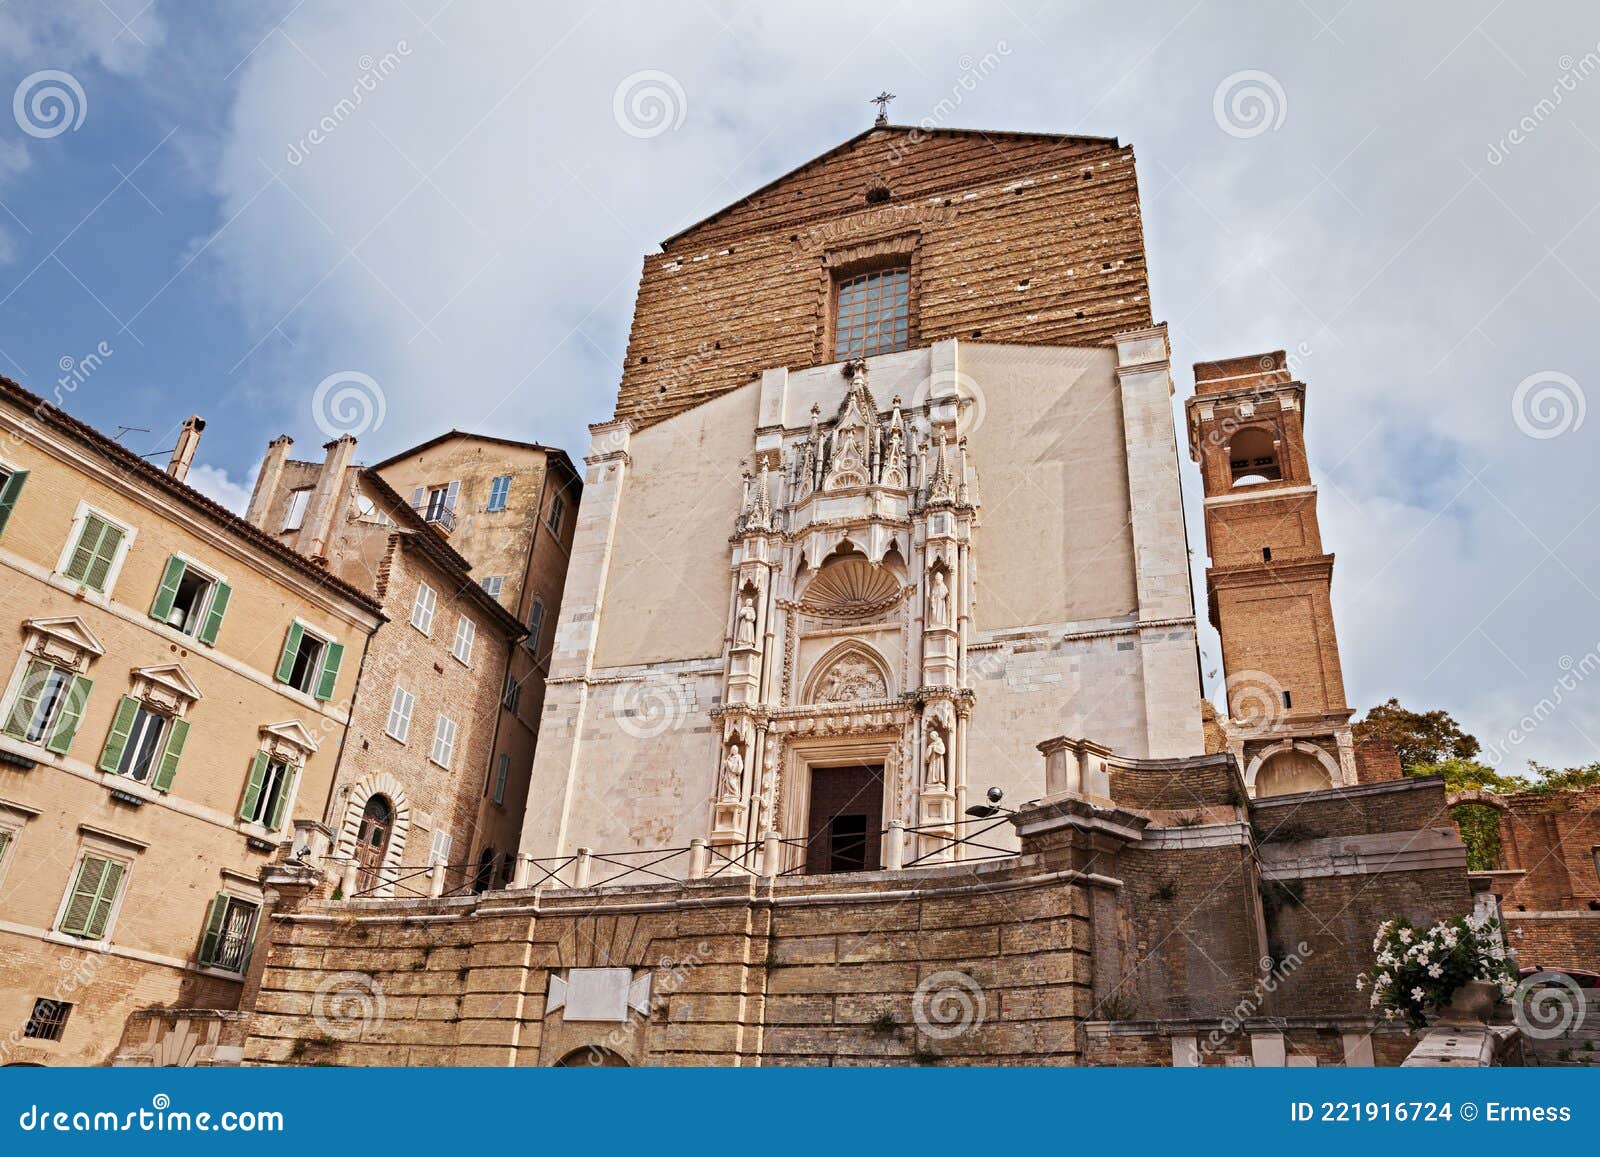 ancona, marche, italy: the ancient church san francesco alle scale with the beautiful gothic portal